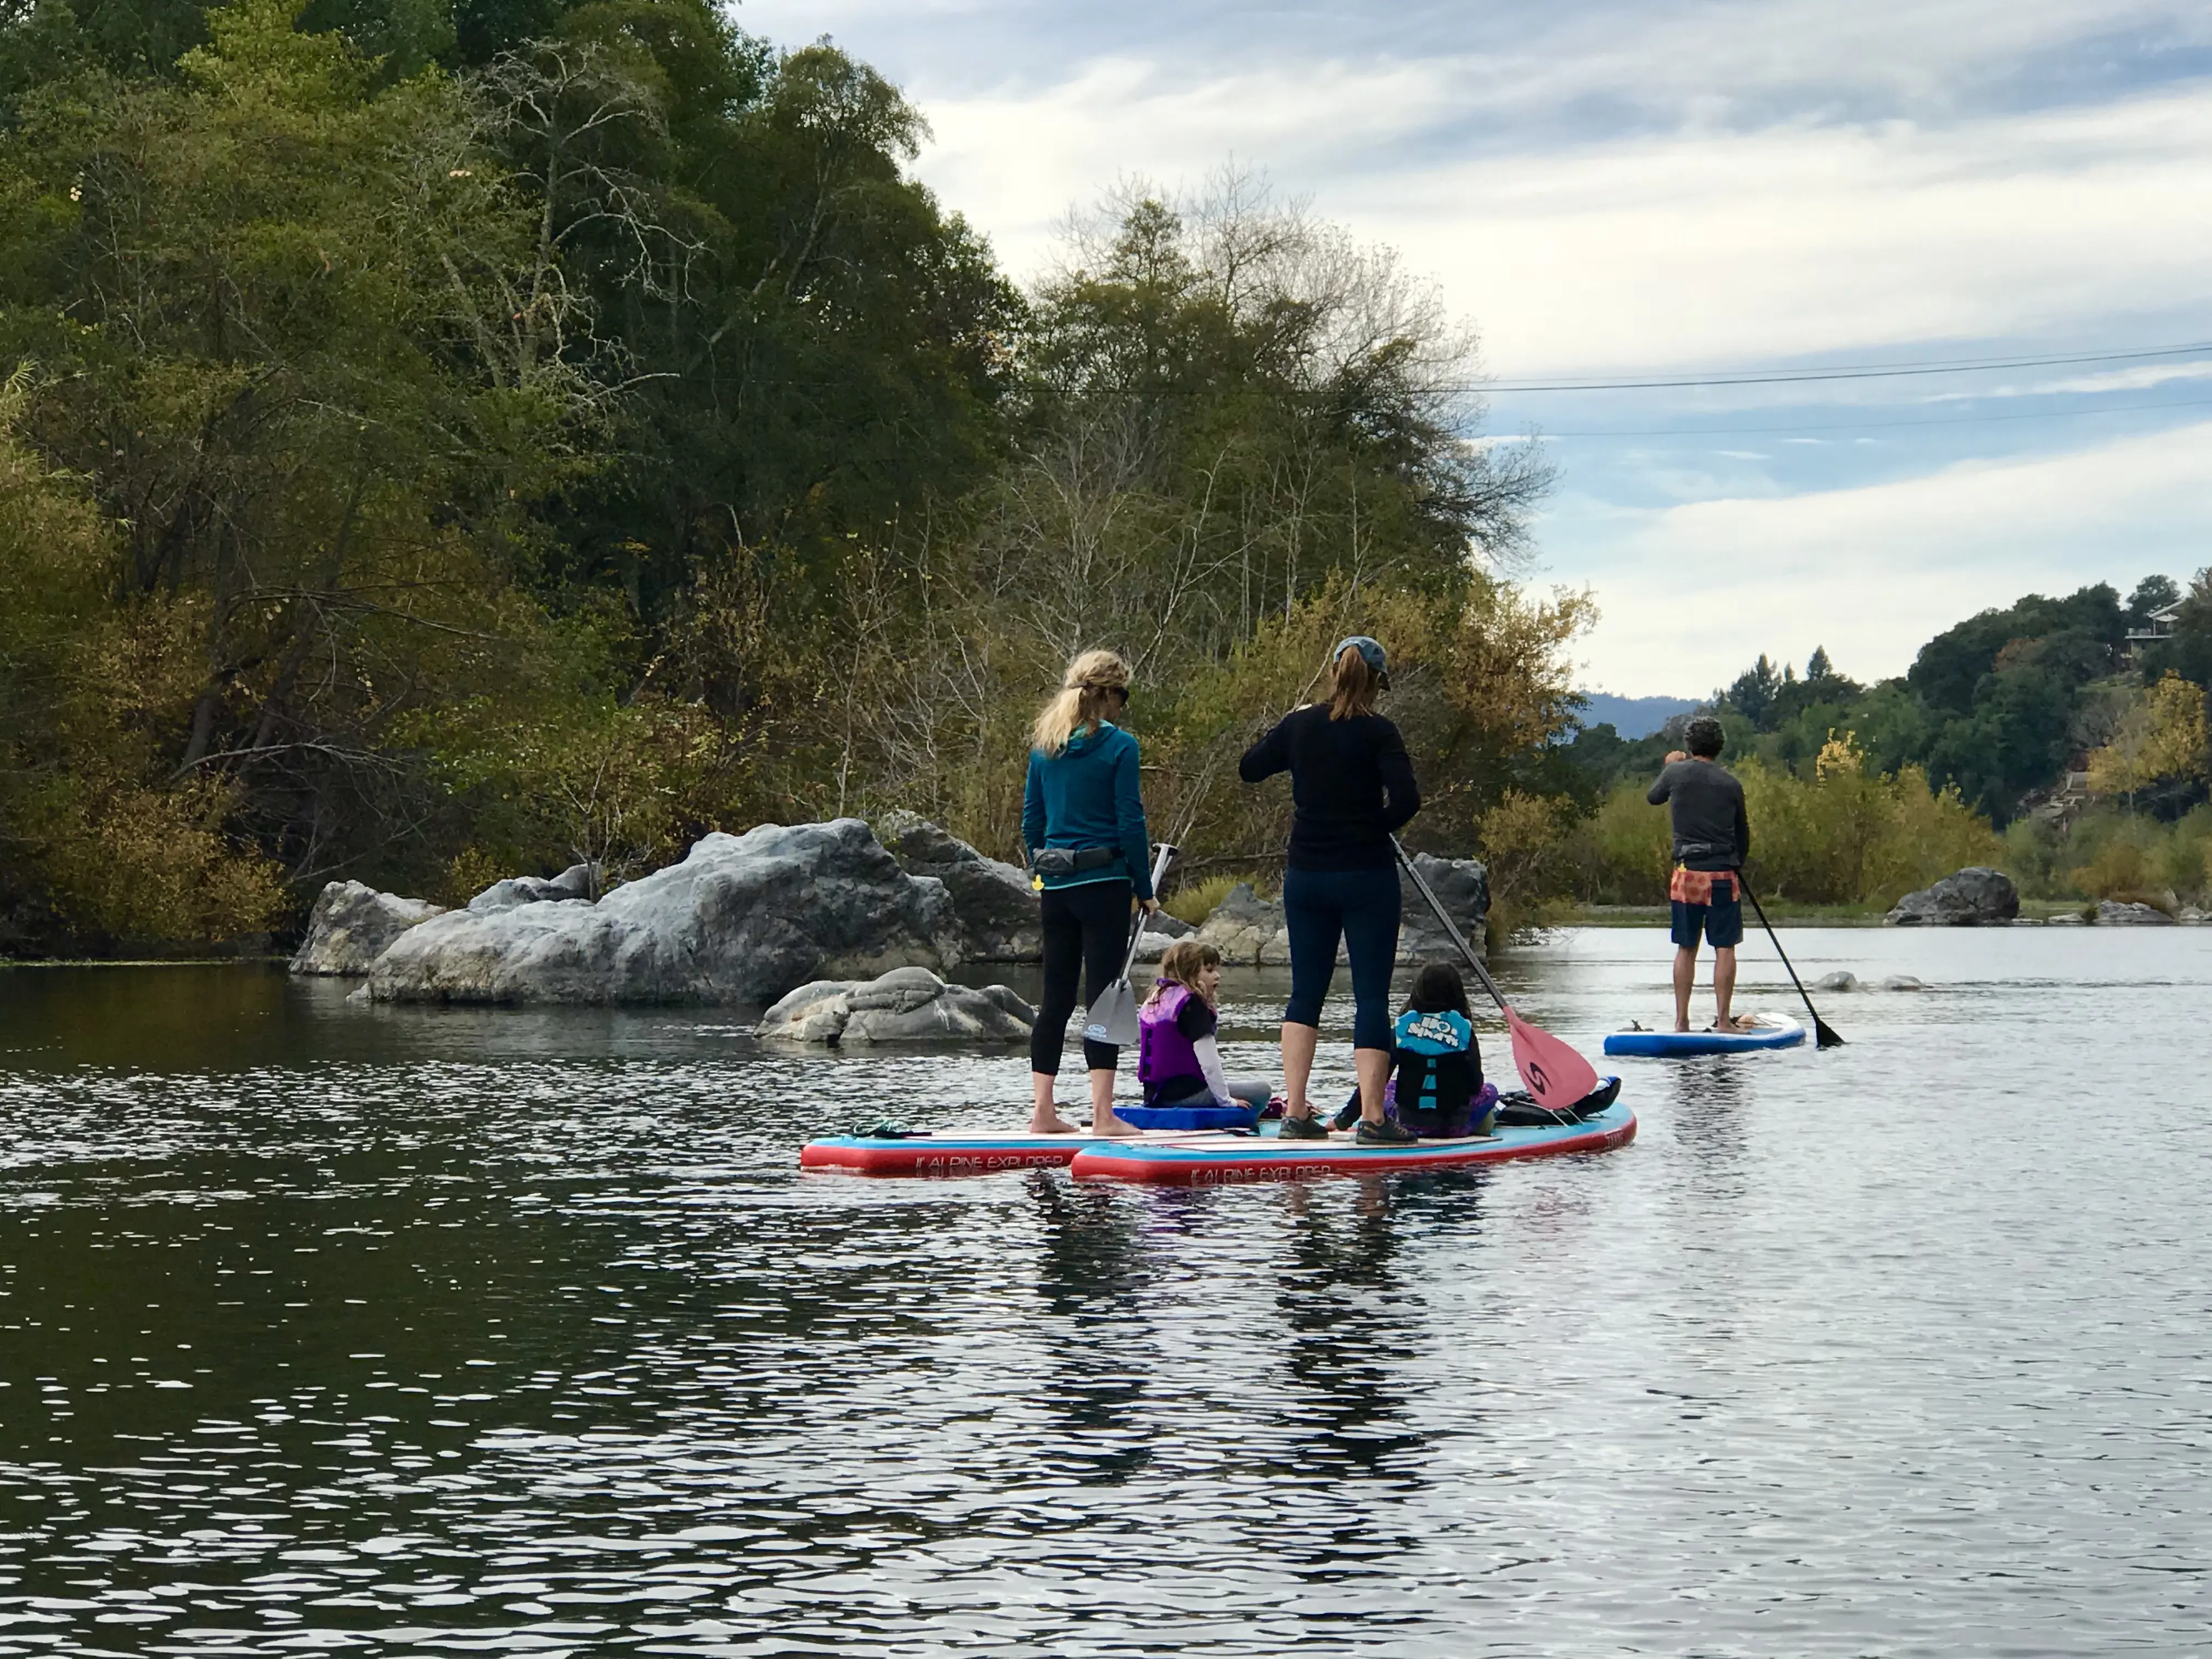 Kids and adults on paddleboards